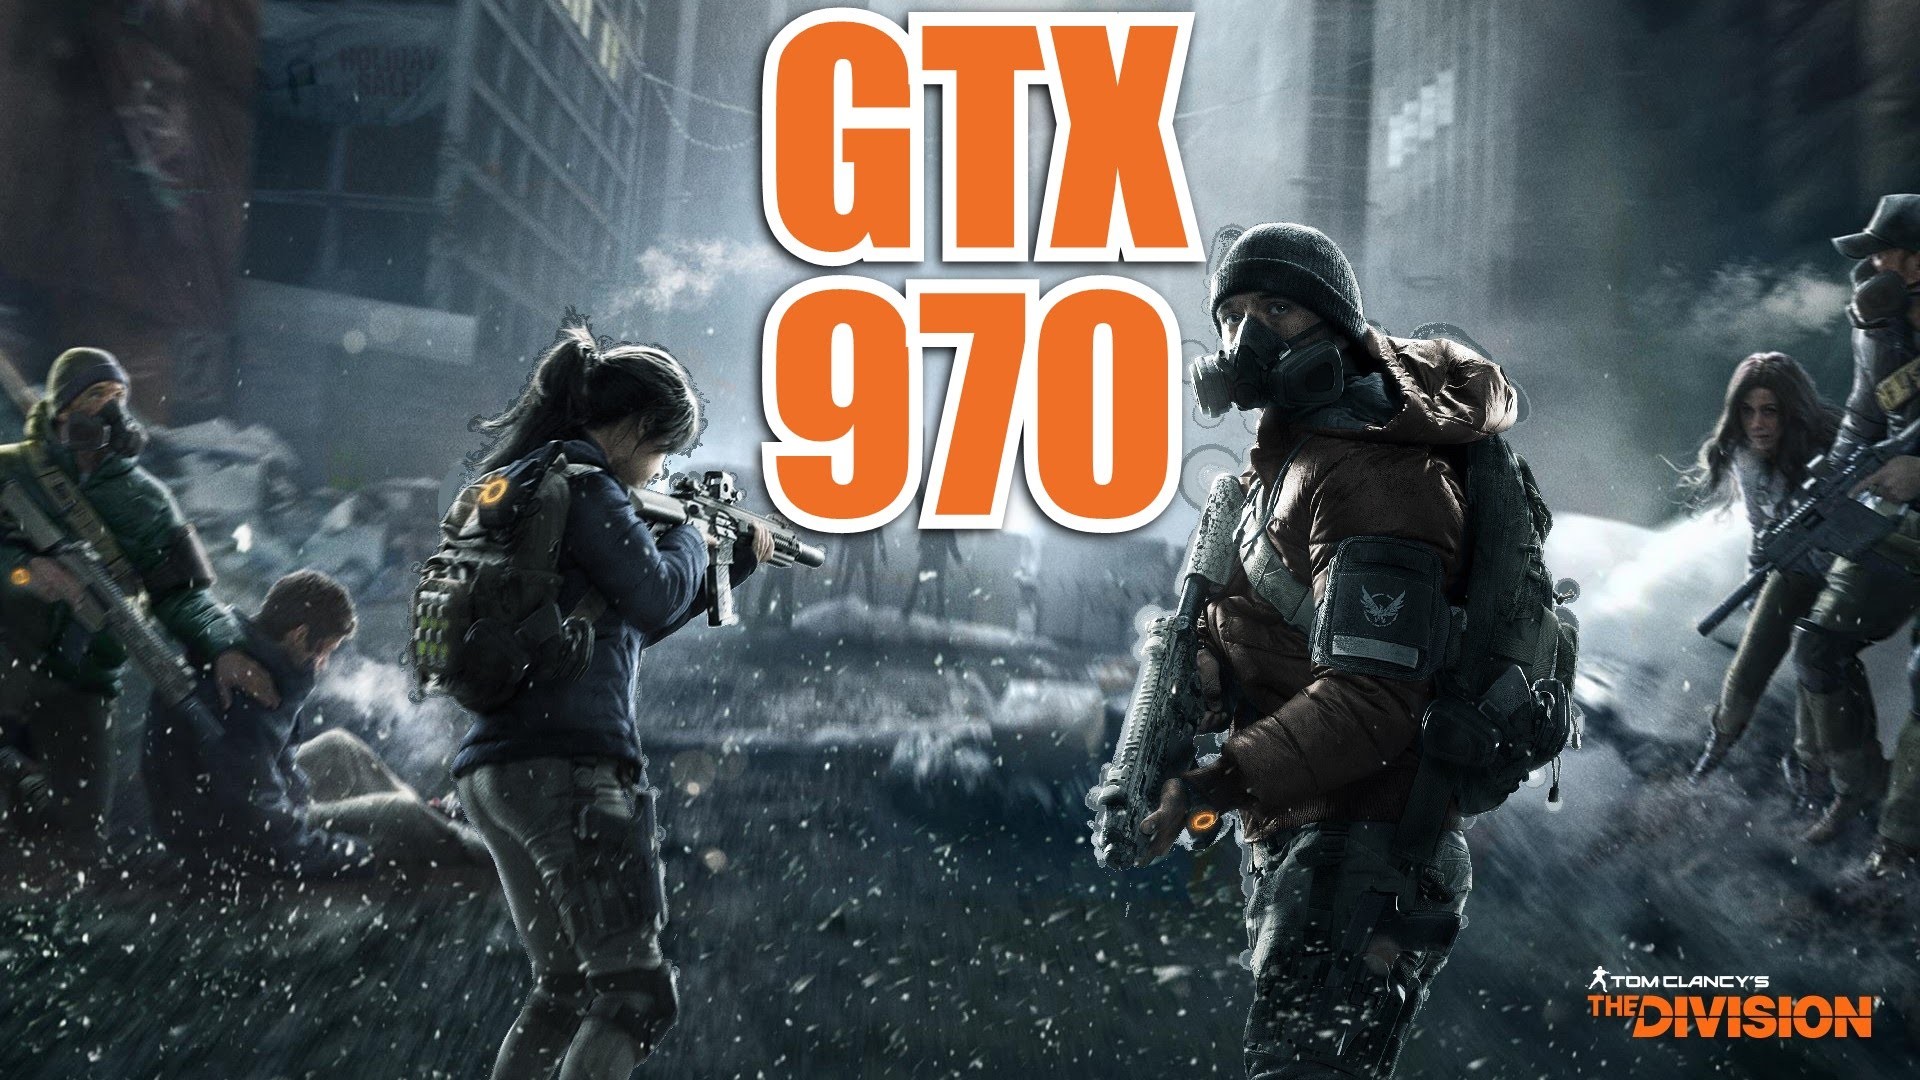 1920x1080 The Division - Open Beta | GTX 970 & i7 6700k | 1080p High | FRAME-RATE TEST